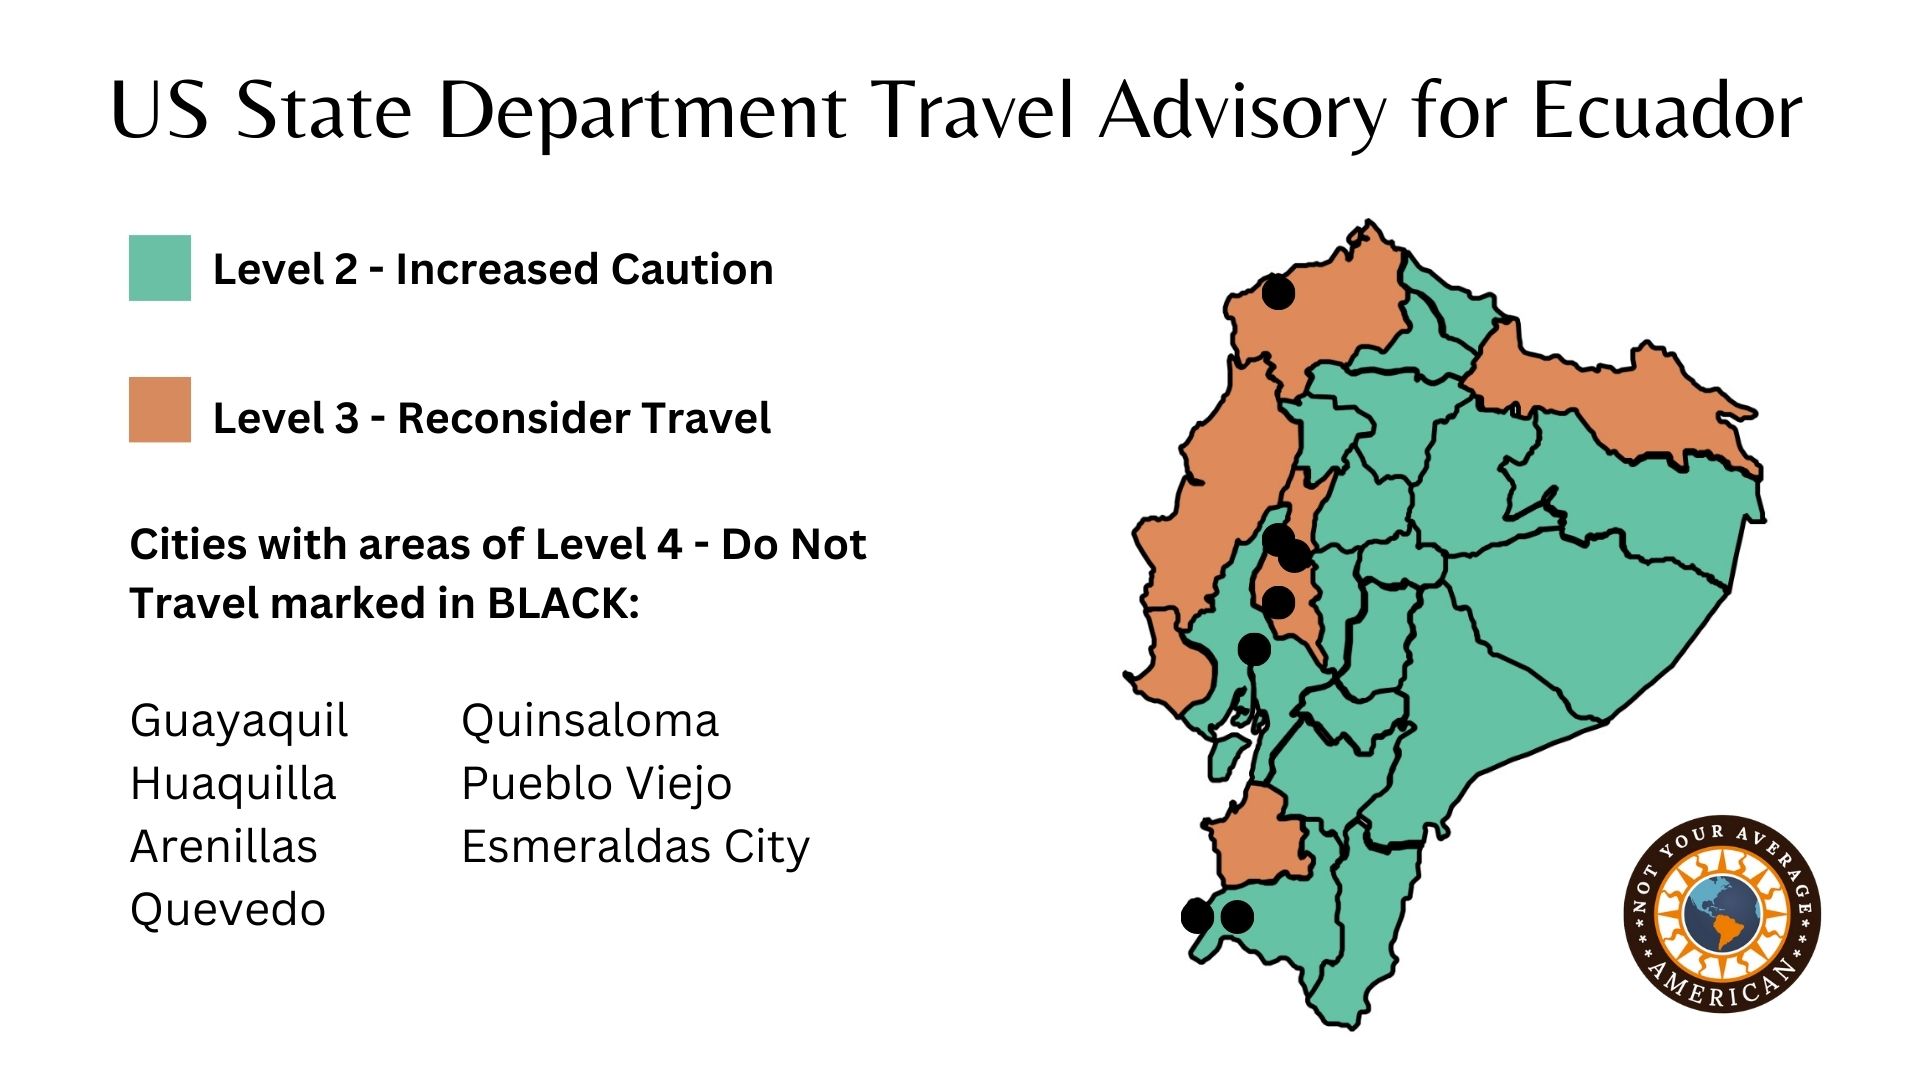 This image helps people visualize the latest Ecuador Travel Advisory from the US State Department